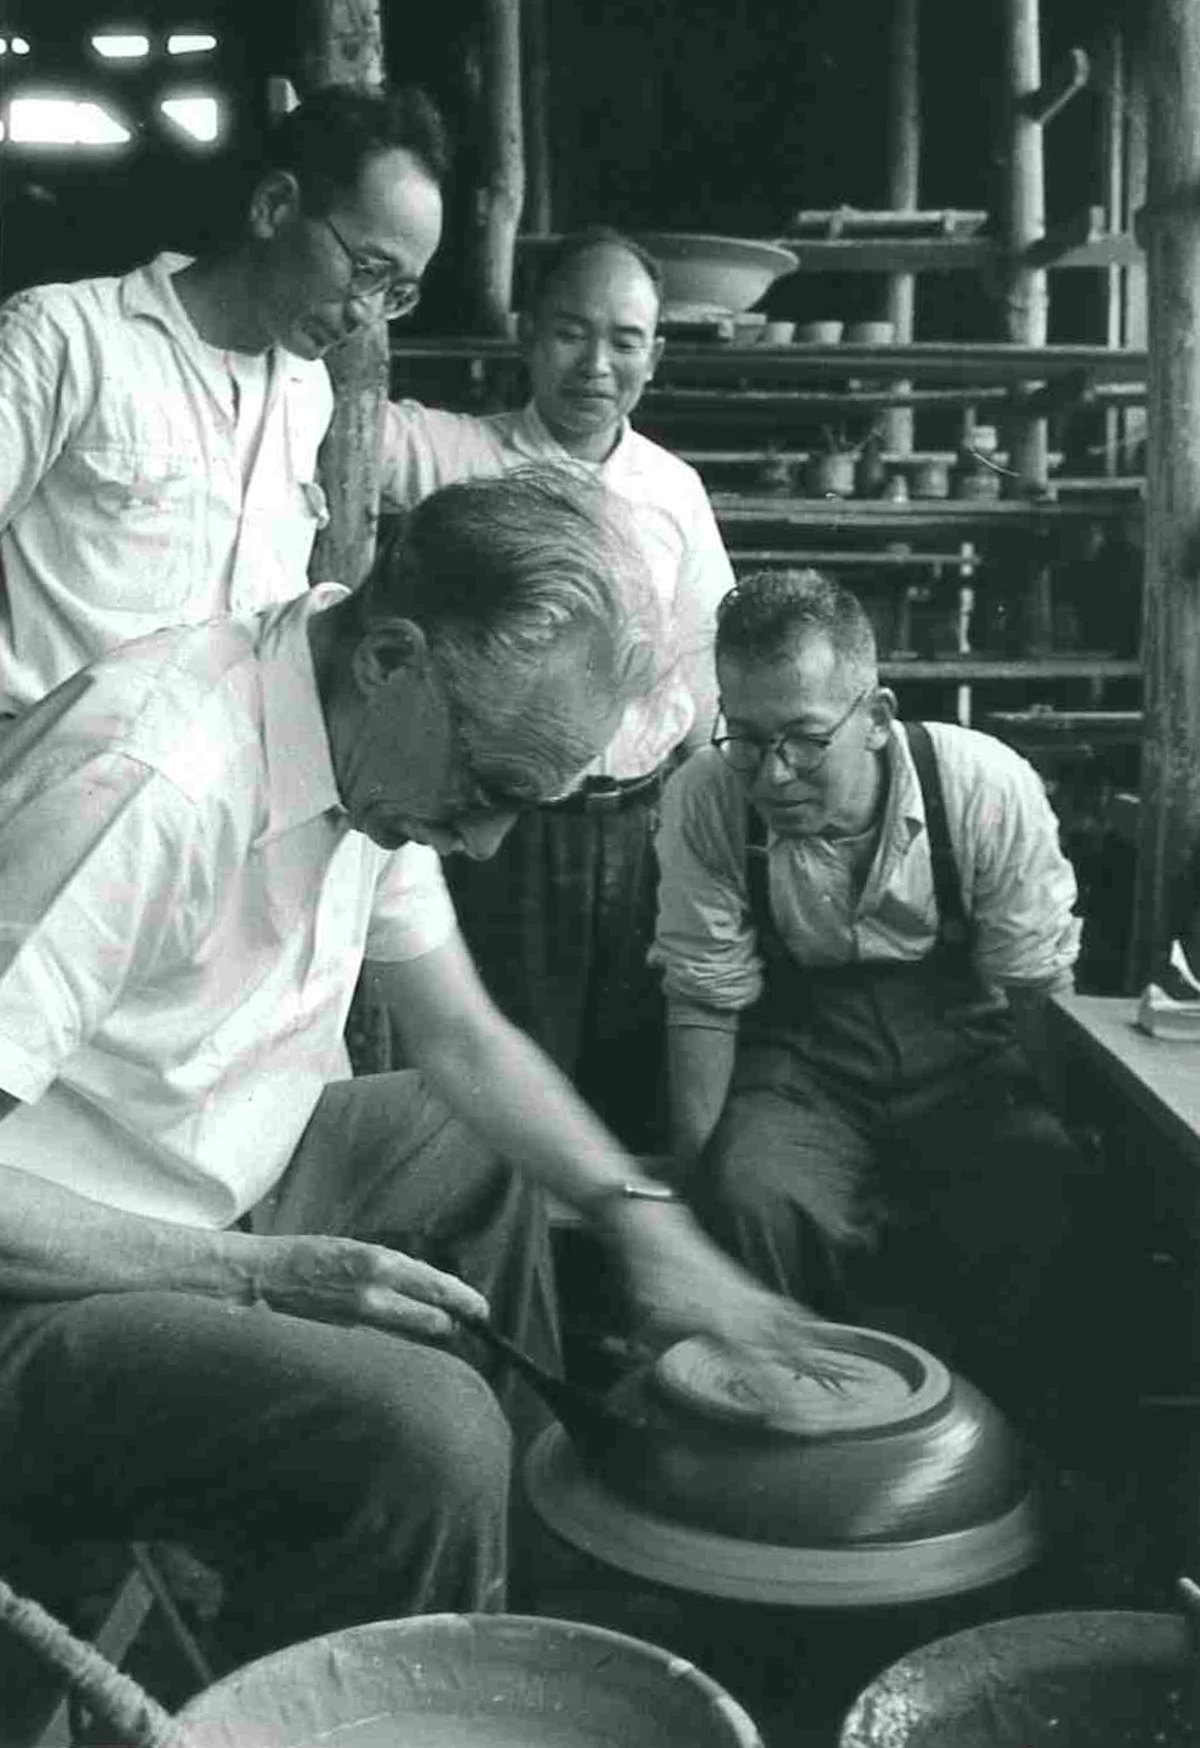 Bernard Leach teaching Japanese students at the Marusan kiln, Fujima. From the Bernard Leach archive at the Crafts Study Centre, University for the Creative Arts, BHL/12677.